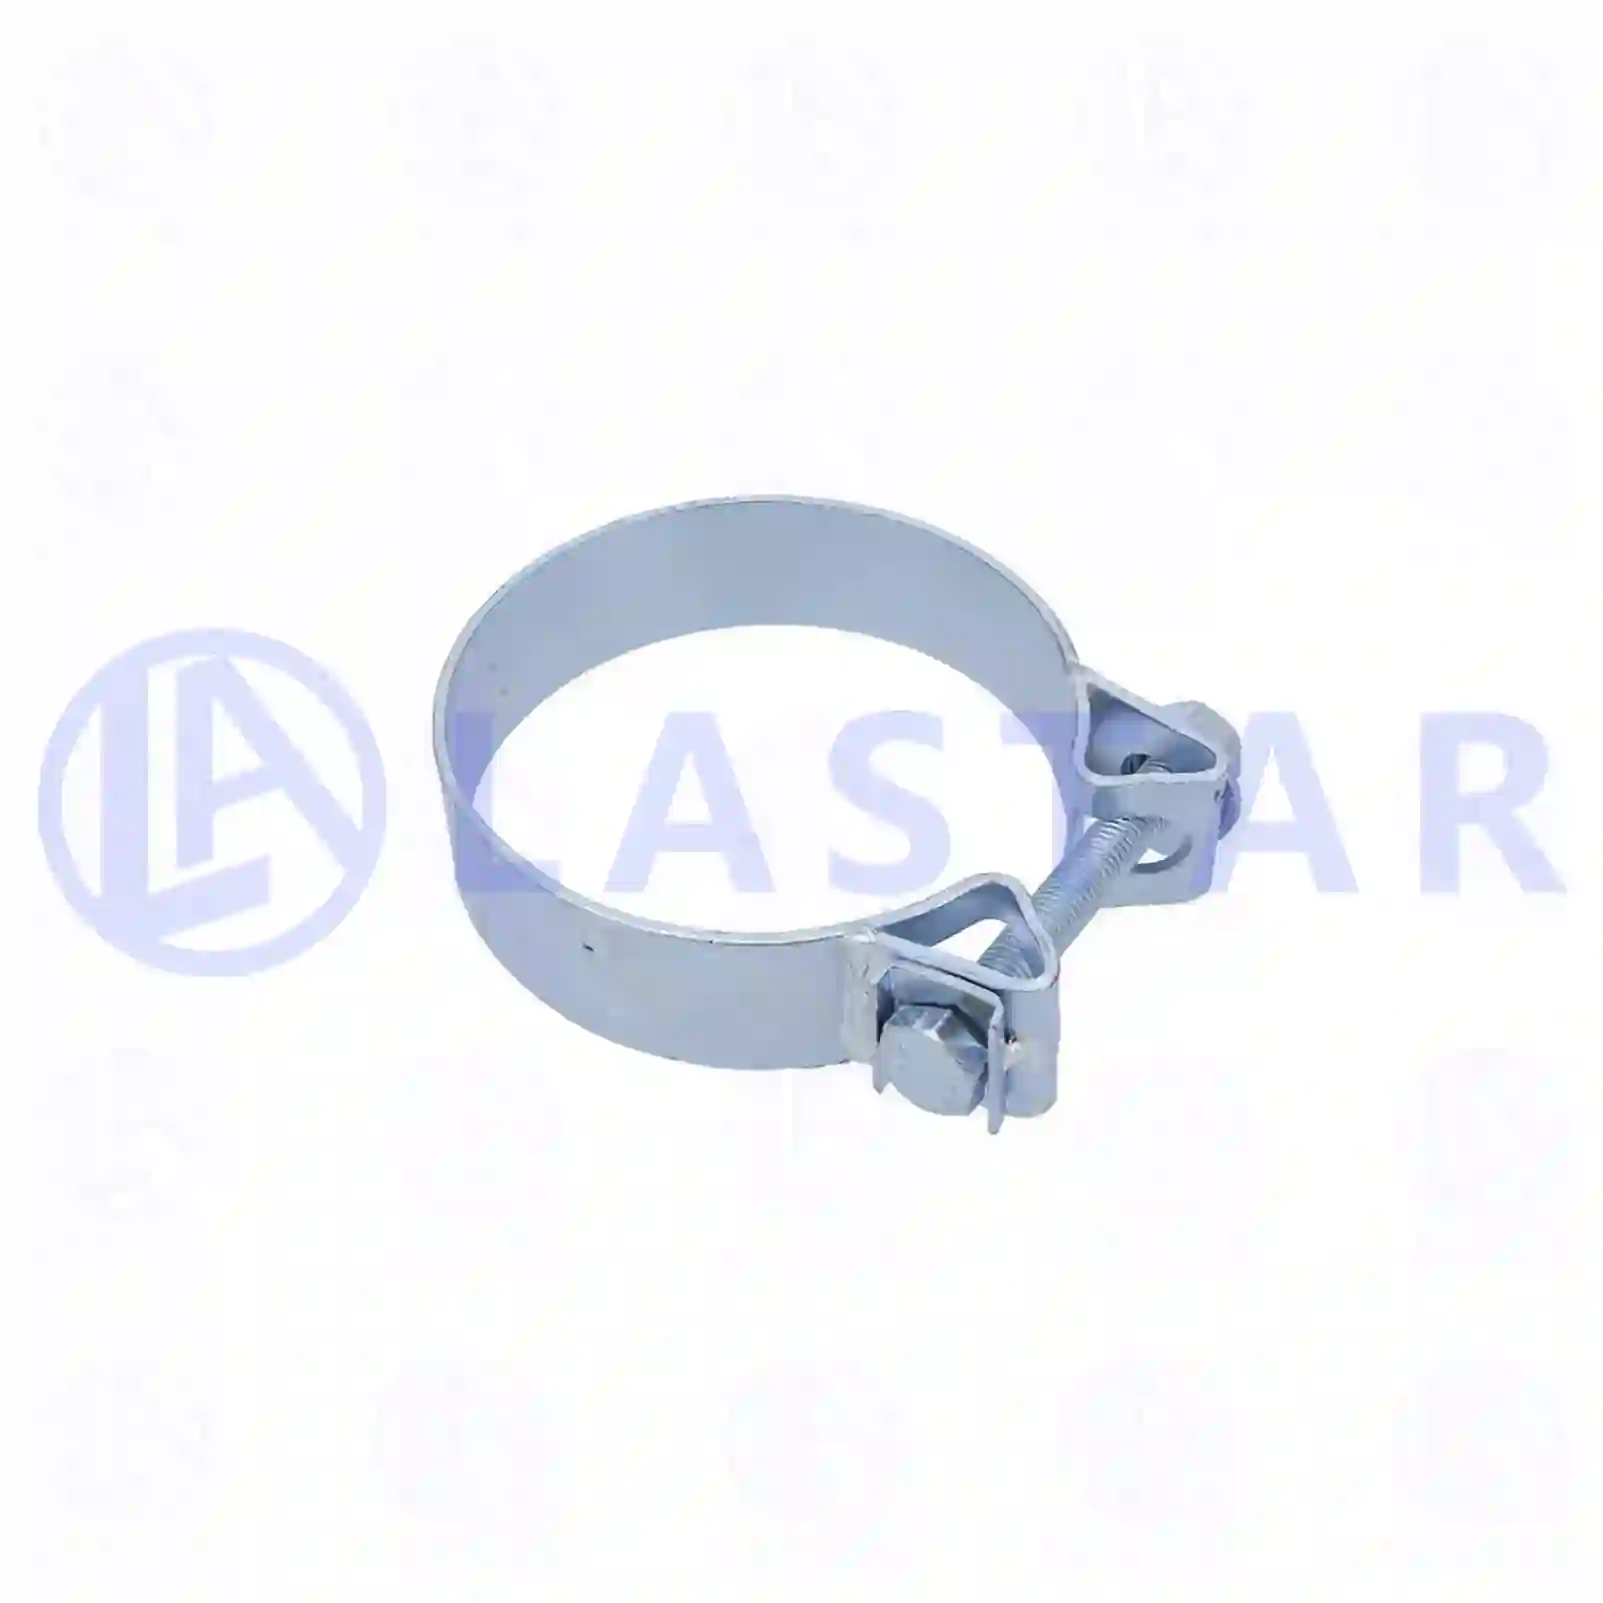 Clamp, 77706164, 1384745, 328928, ZG10251-0008 ||  77706164 Lastar Spare Part | Truck Spare Parts, Auotomotive Spare Parts Clamp, 77706164, 1384745, 328928, ZG10251-0008 ||  77706164 Lastar Spare Part | Truck Spare Parts, Auotomotive Spare Parts